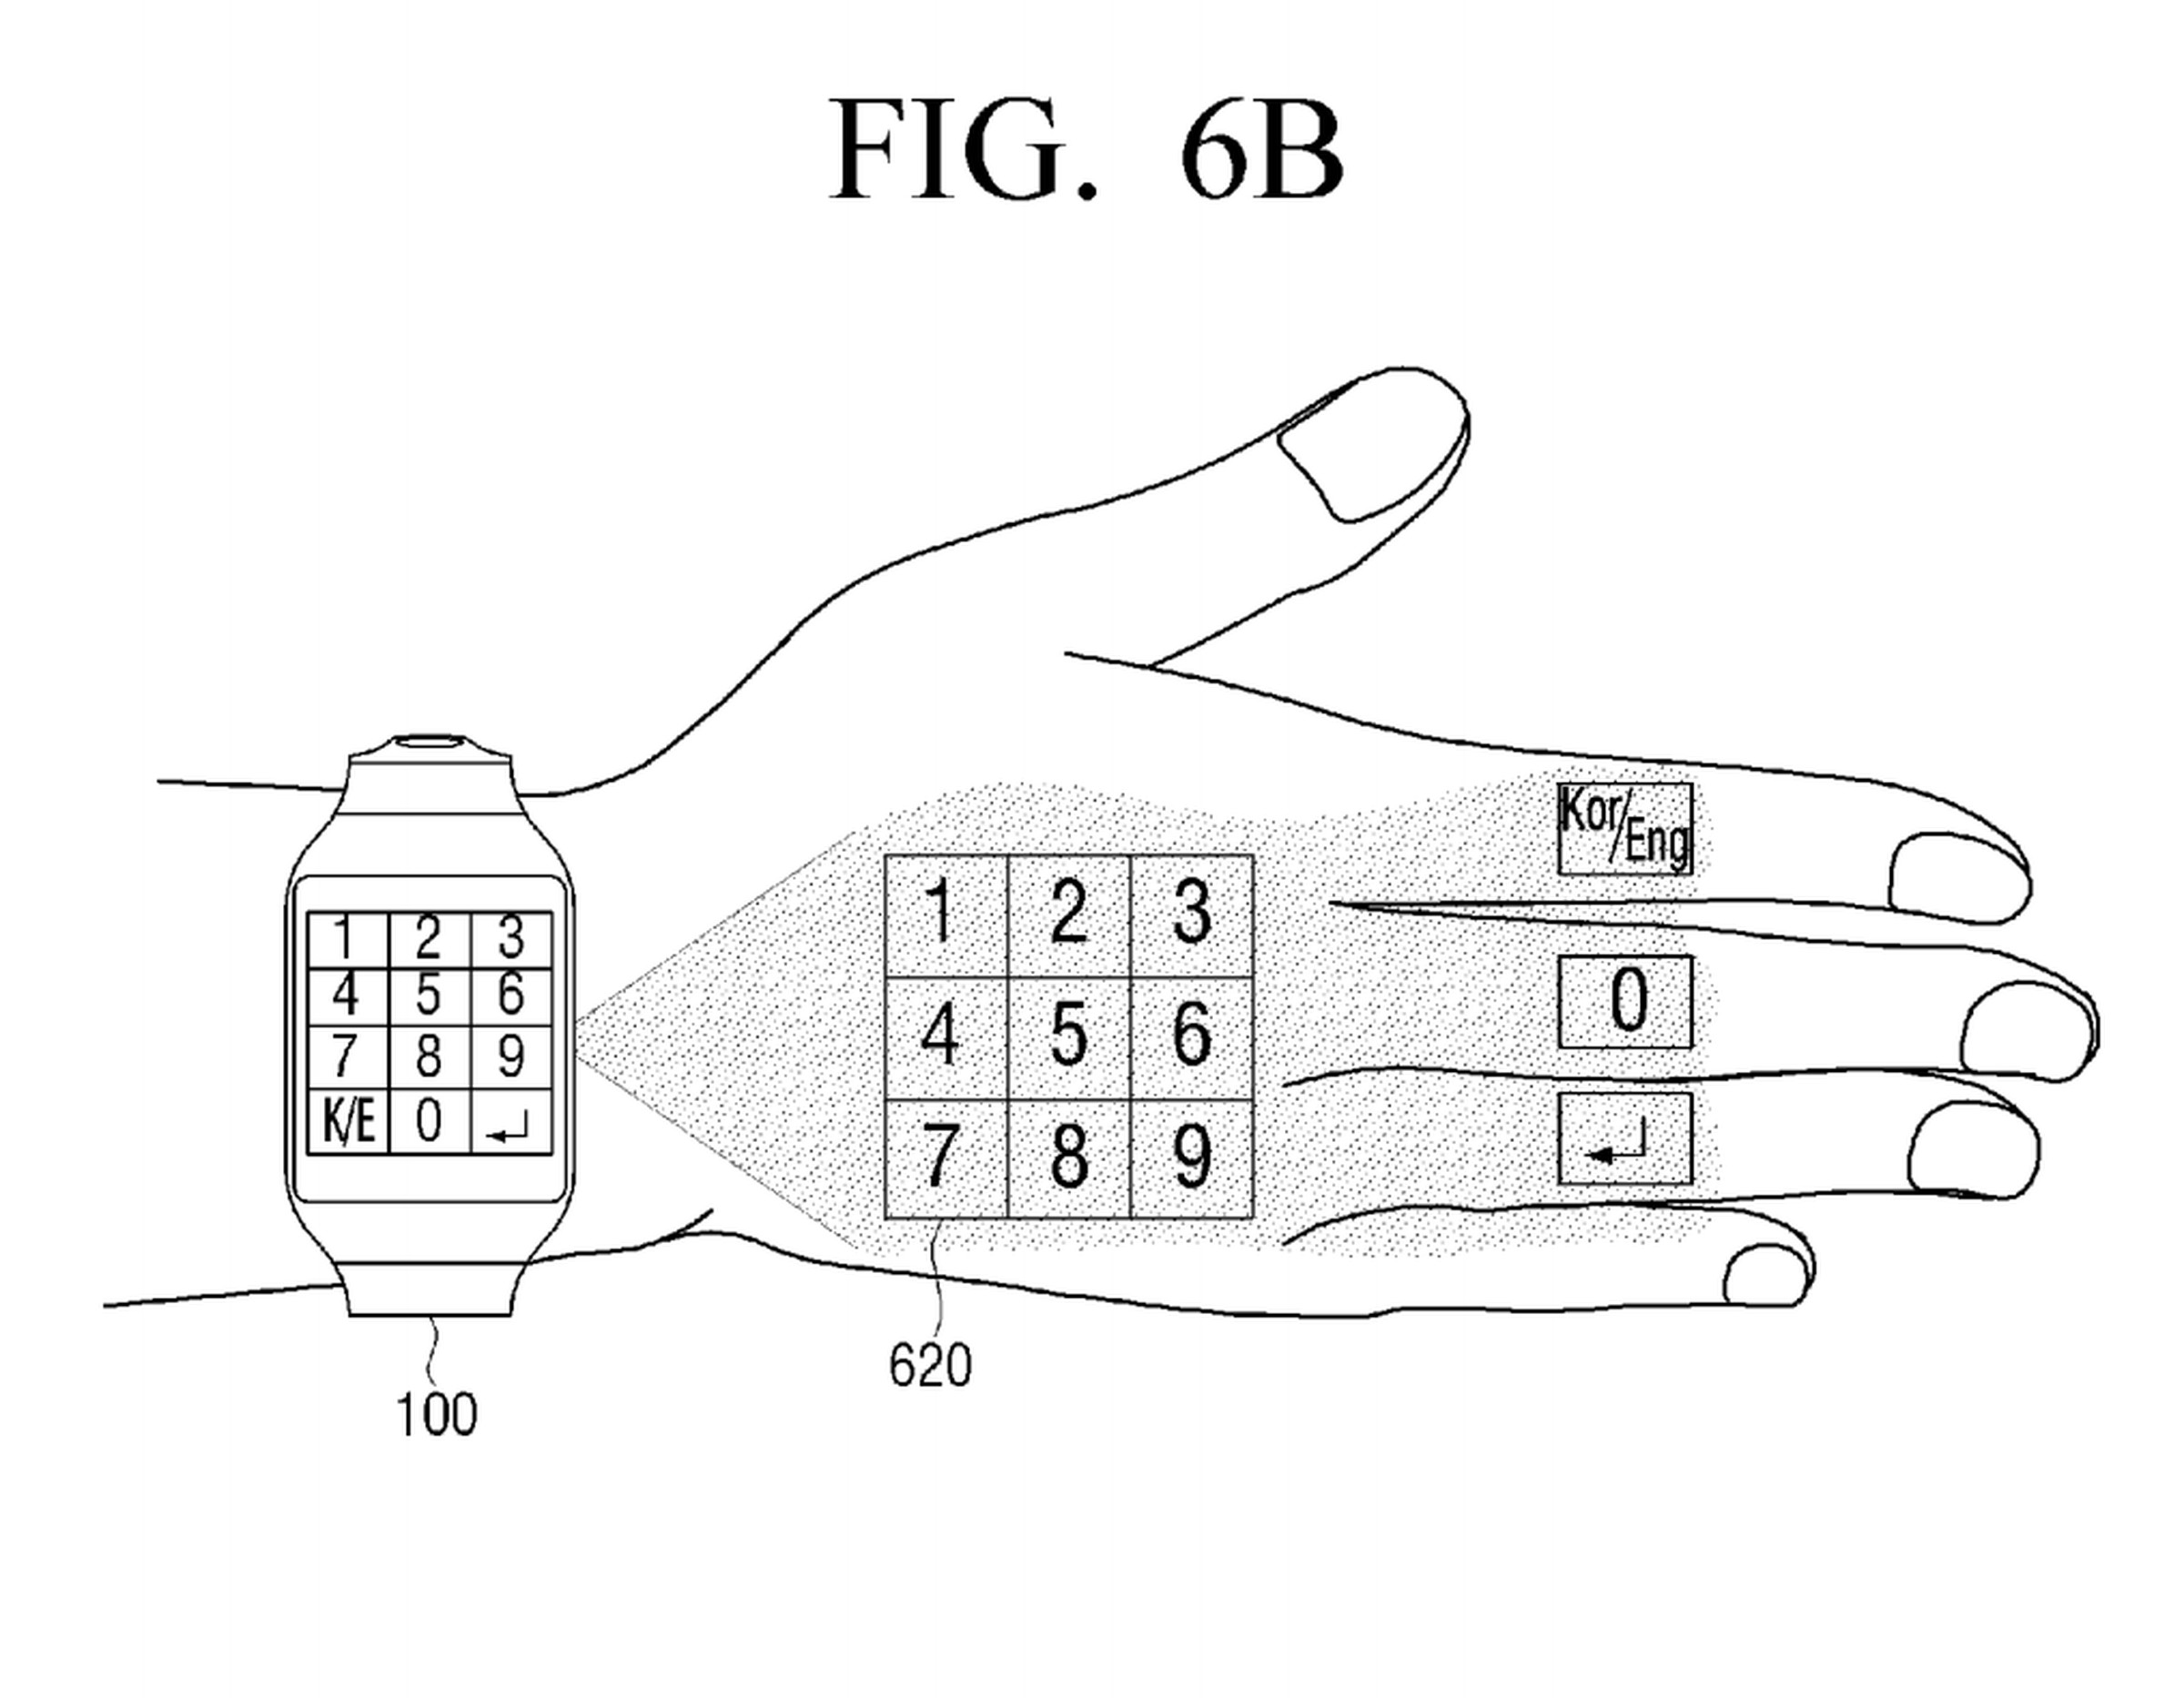 Samsung smart watch projection patent images